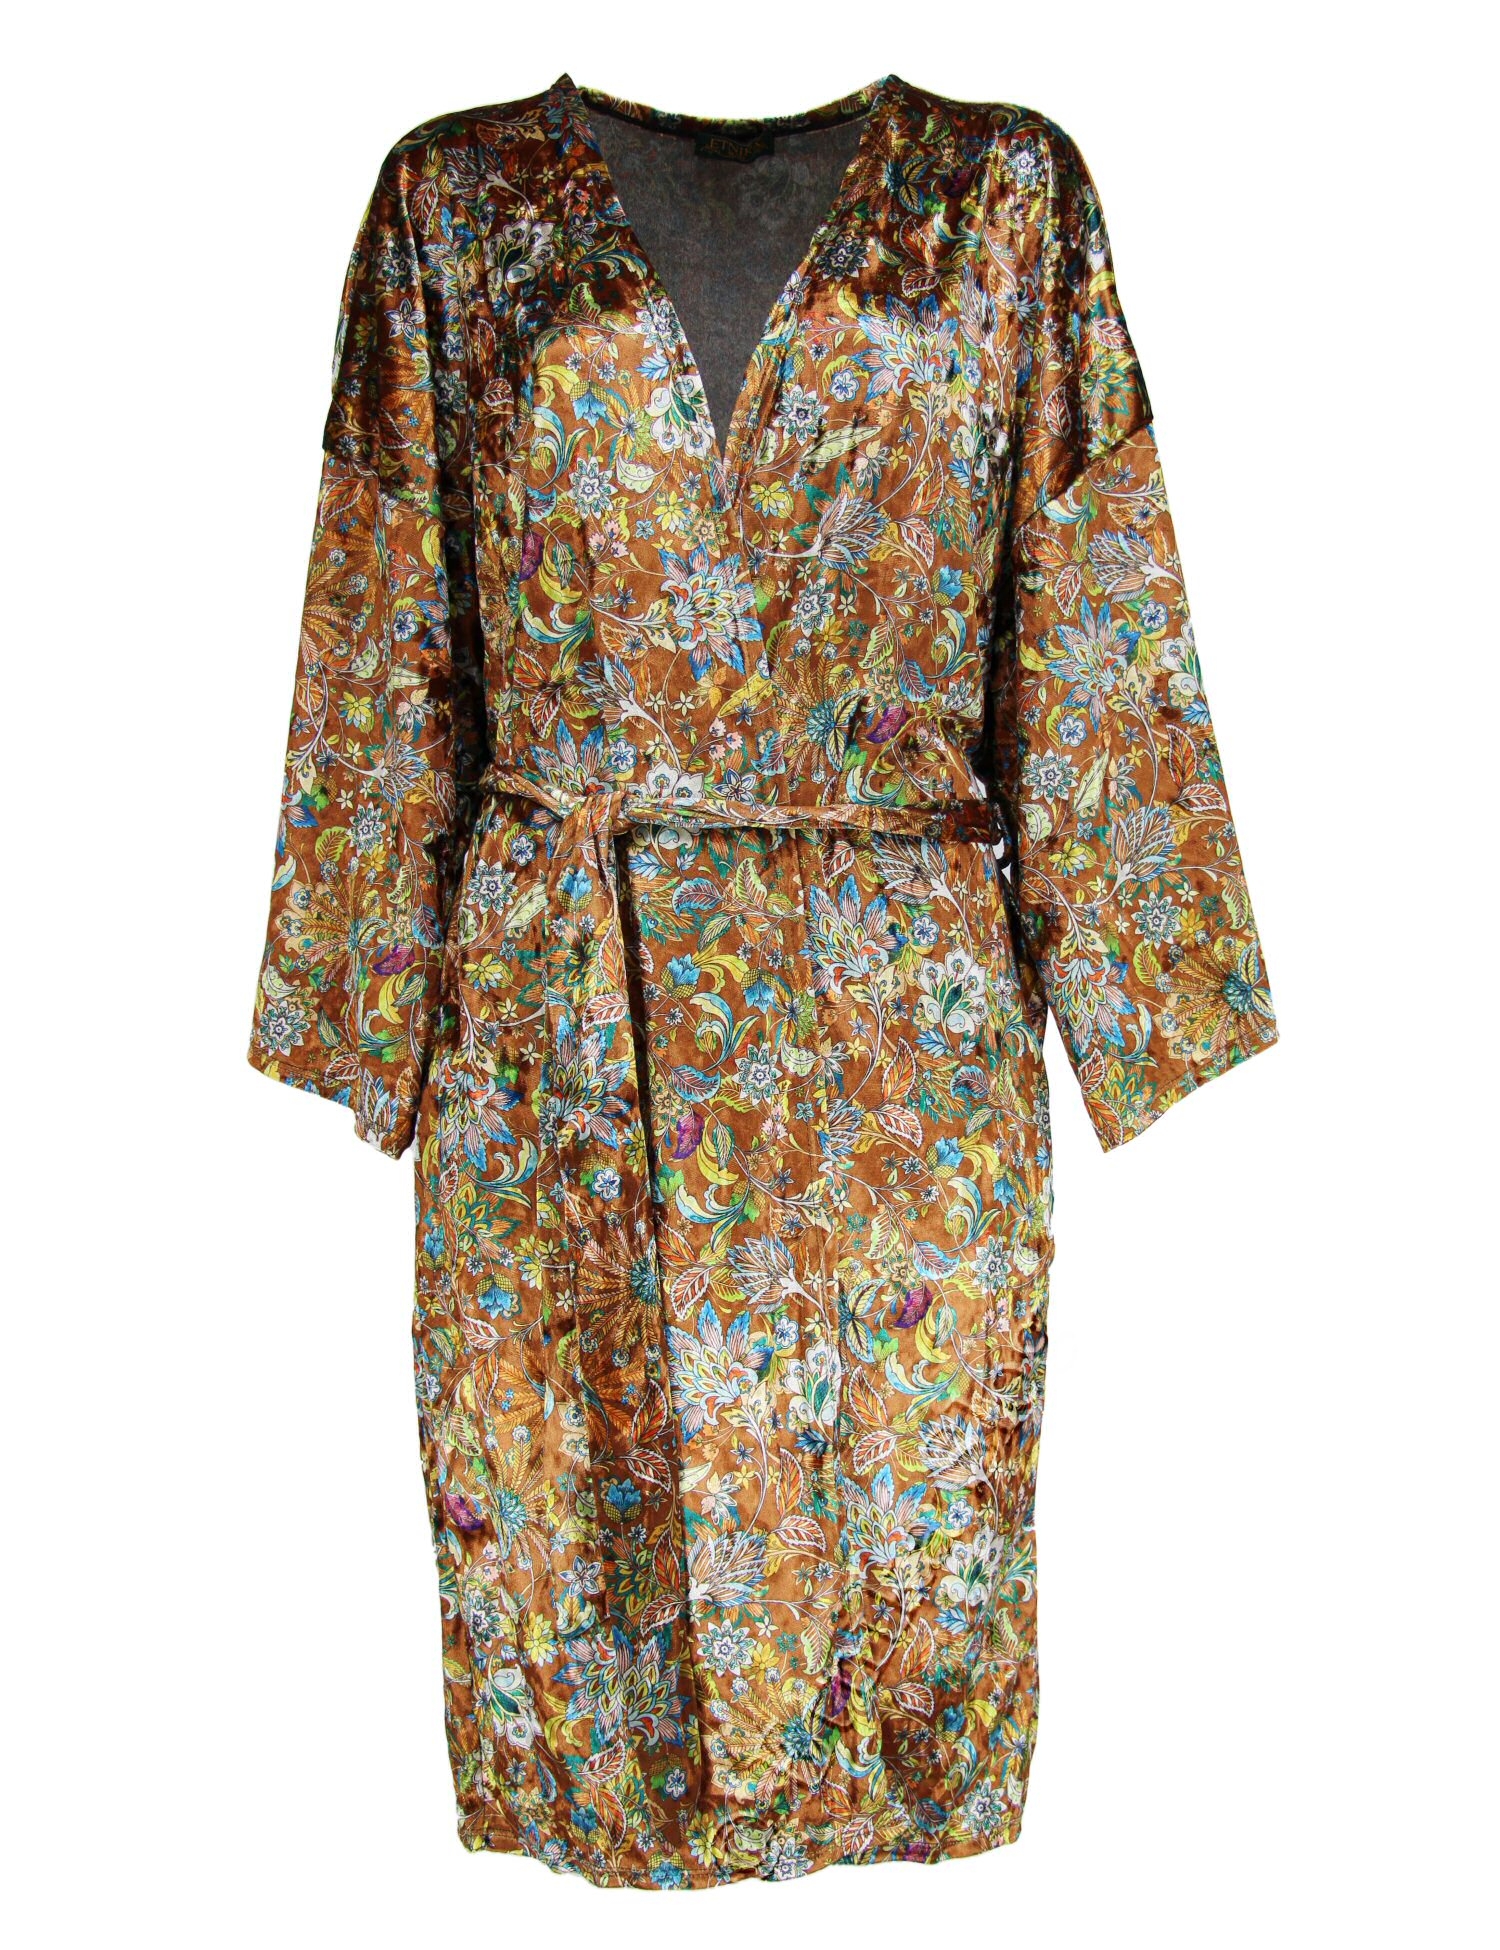 JUMPSUIT AND KIMONO MADE OF JERSEY AND VELVET AB-VWD04-AD - Oriente Import S.r.l.